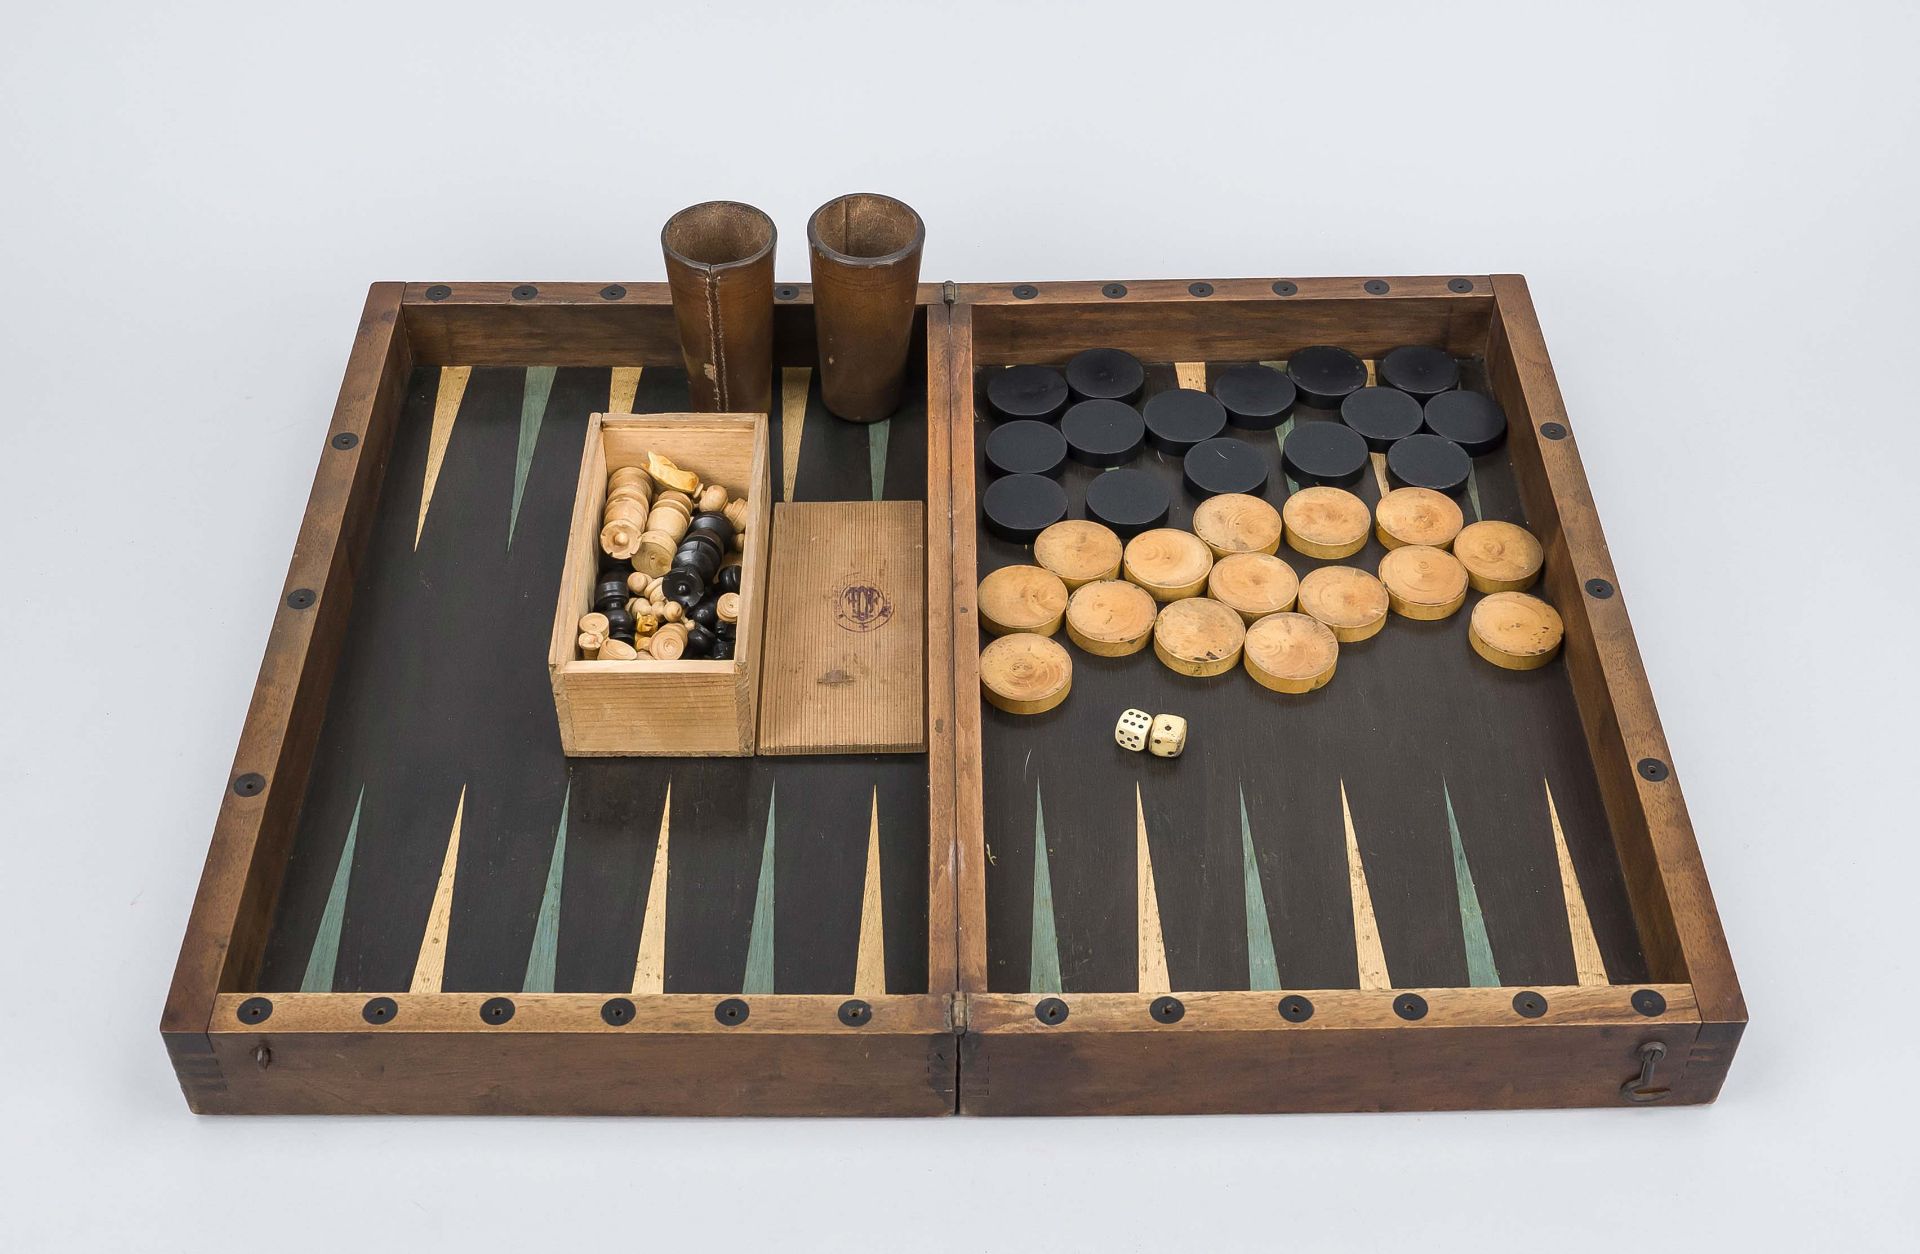 Folding box for chess or backgammon. 1st half of the 20th century, outside for chess, the squares